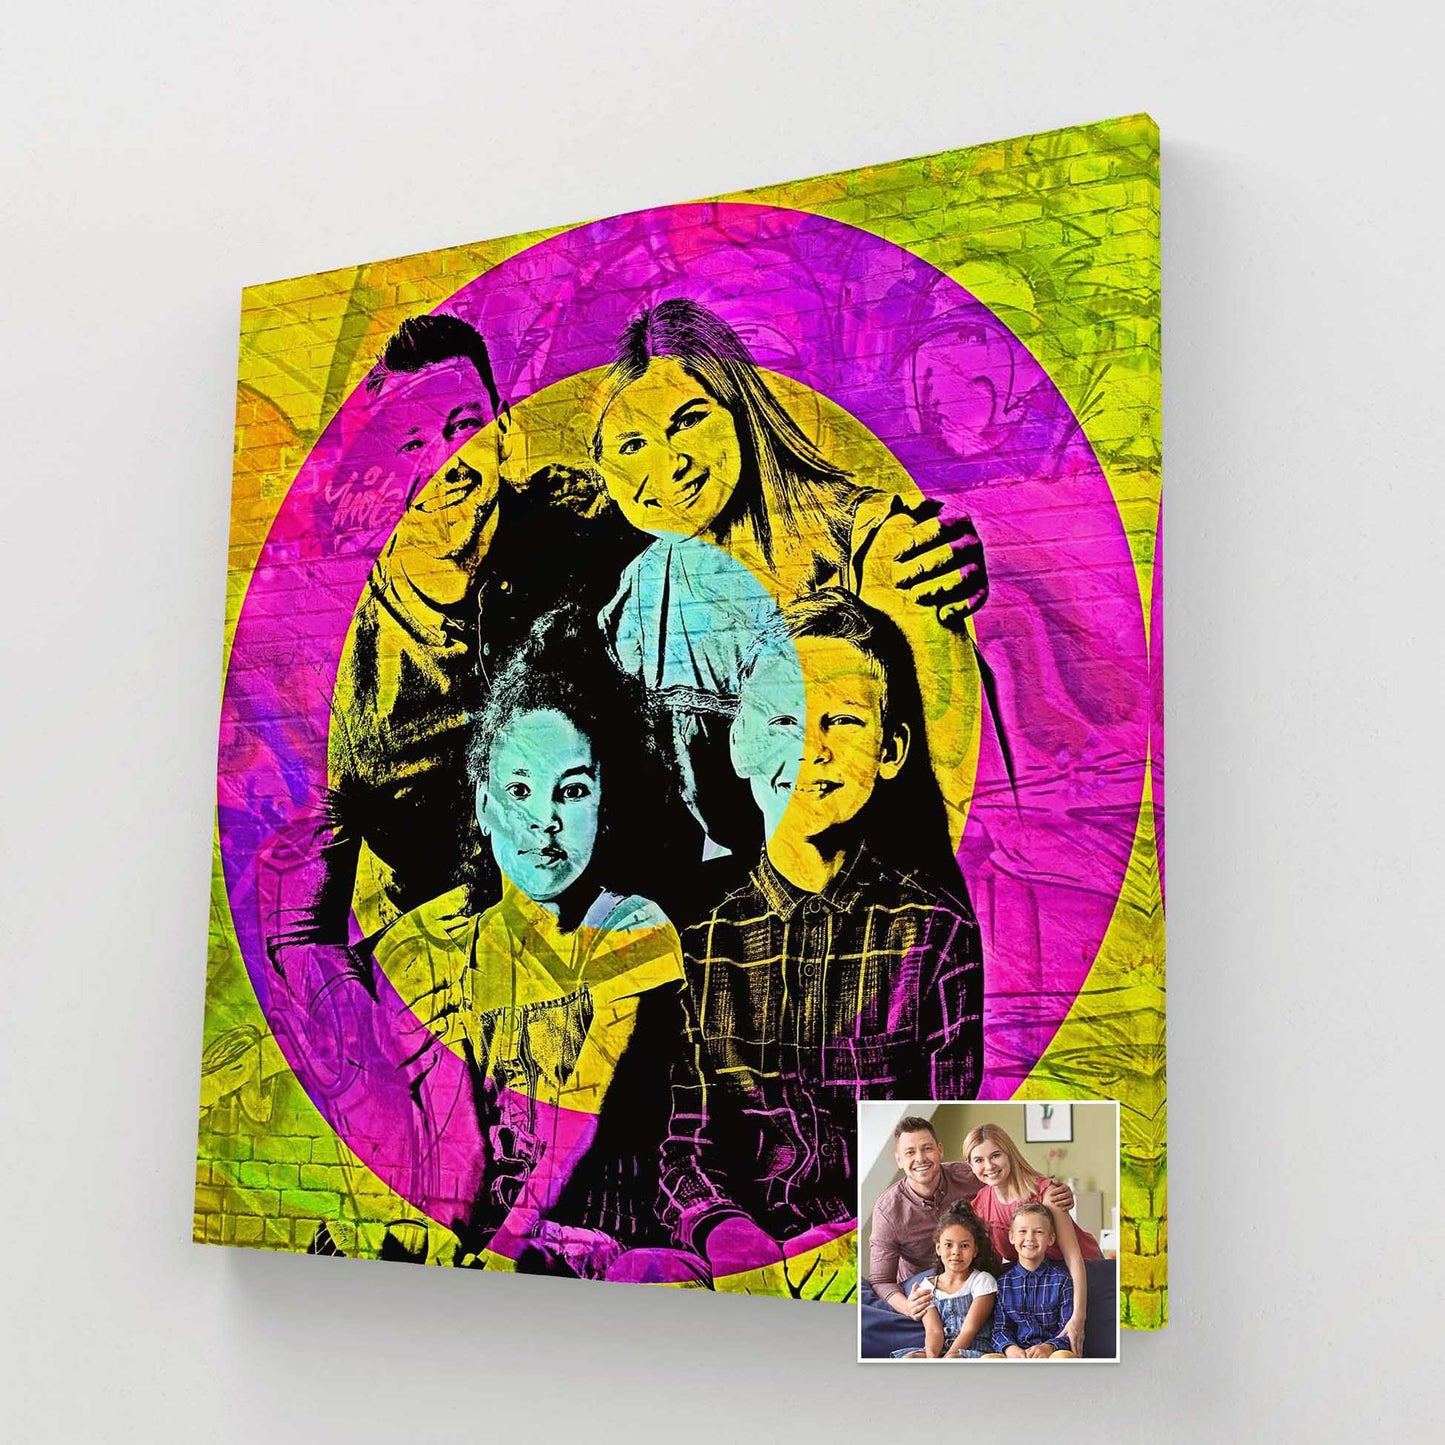 Immerse yourself in the world of urban creativity with our Personalised Graffiti Street Art Canvas. Its fun, colorful, and exciting designs bring a unique vibe to your space. Handmade on woven canvas and printed from your photo